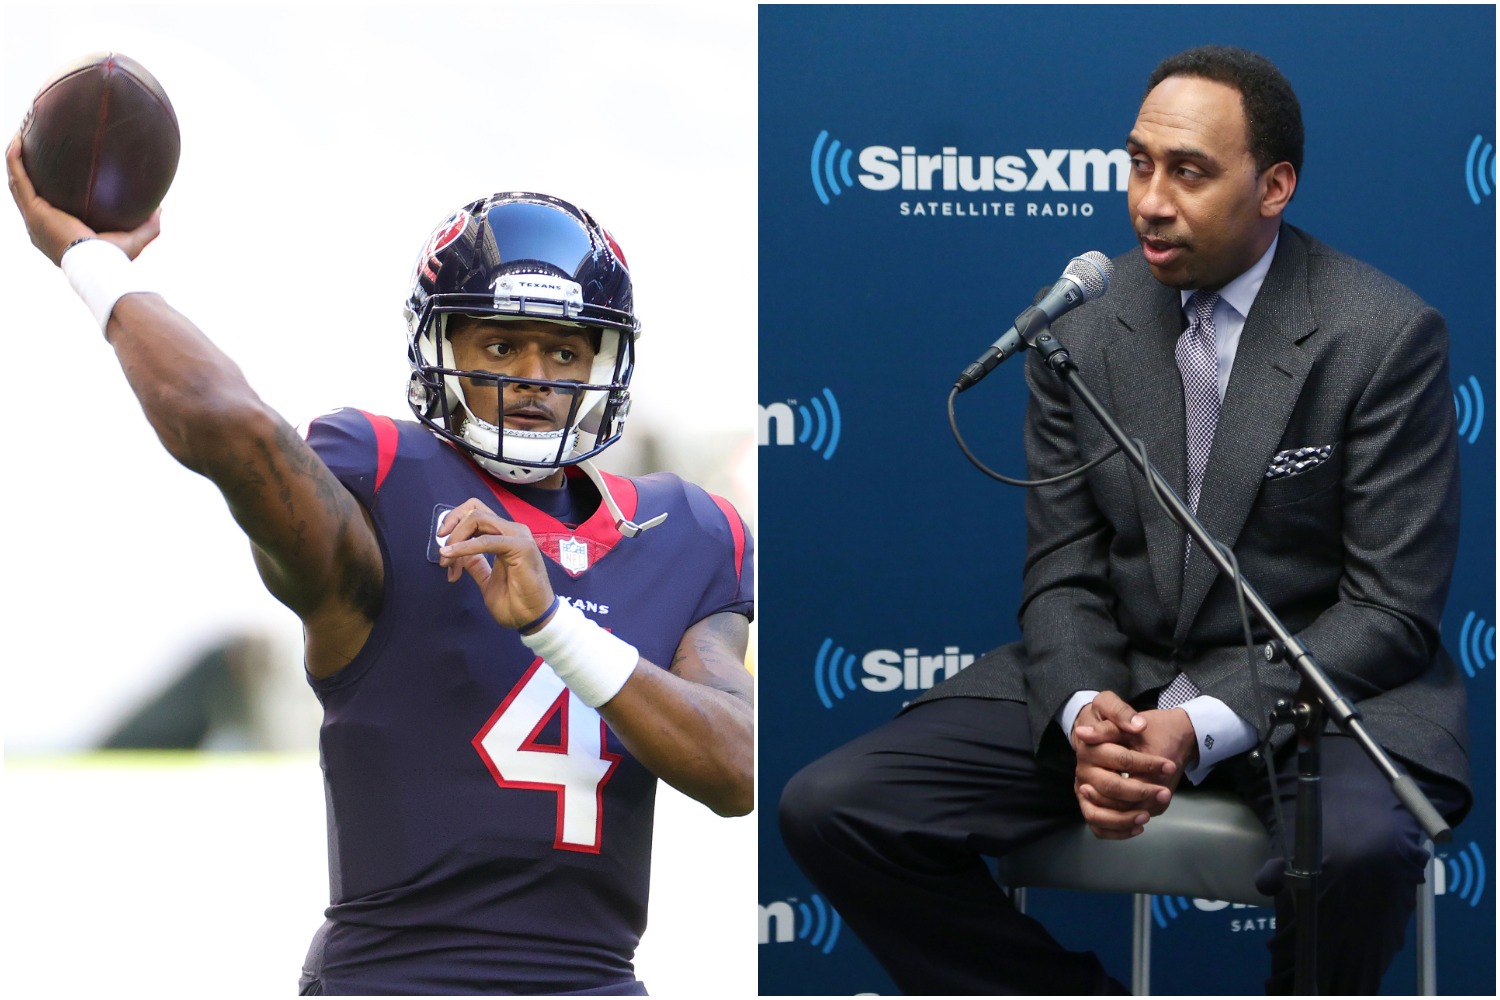 Although the Miami Dolphins just drafted Tua Tagovailoa, Stephen A. Smith believes they are the best fit for Texans QB Deshaun Watson.